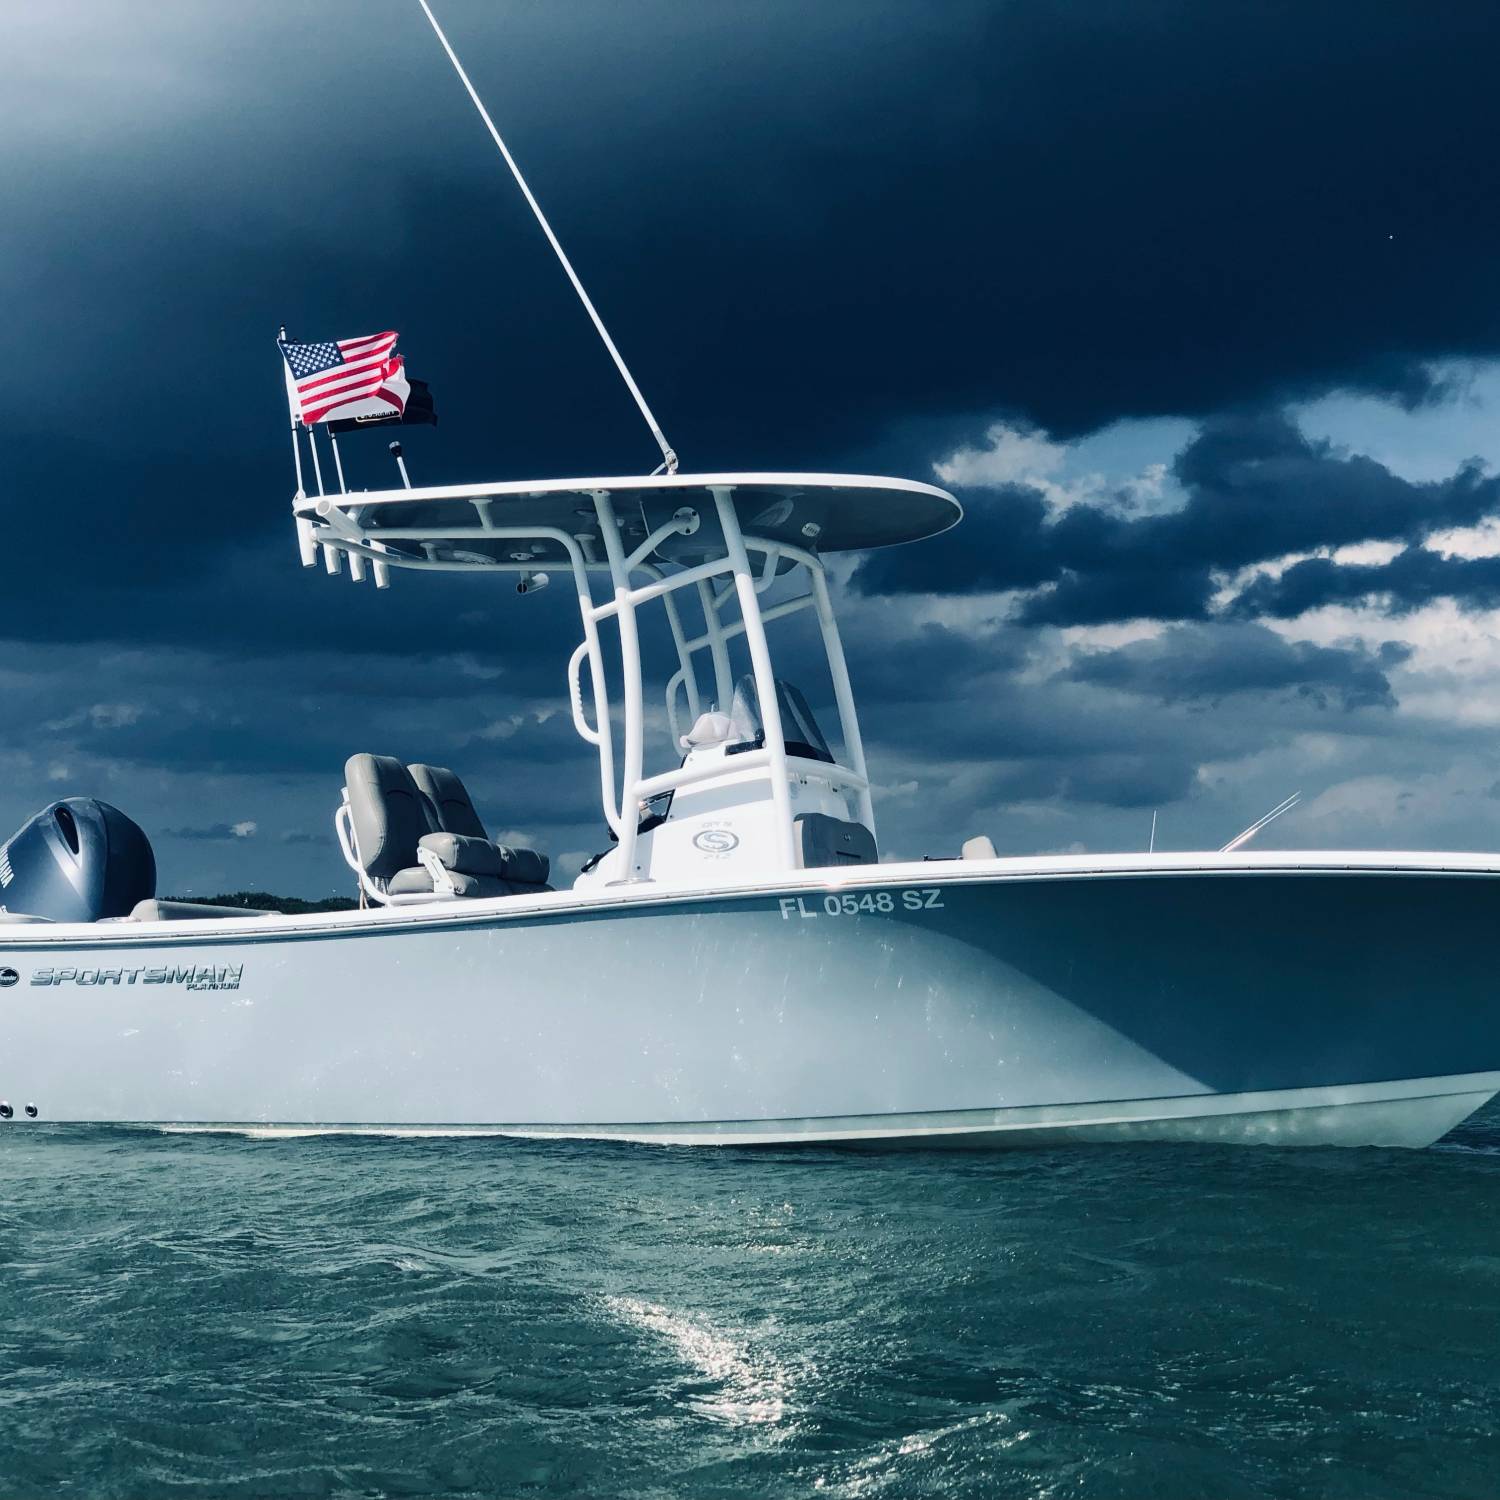 Title: Riders on the Storm - On board their Sportsman Open 212 Center Console - Location: Madeira Beach FL (Johns Pass). Participating in the Photo Contest #SportsmanJuly